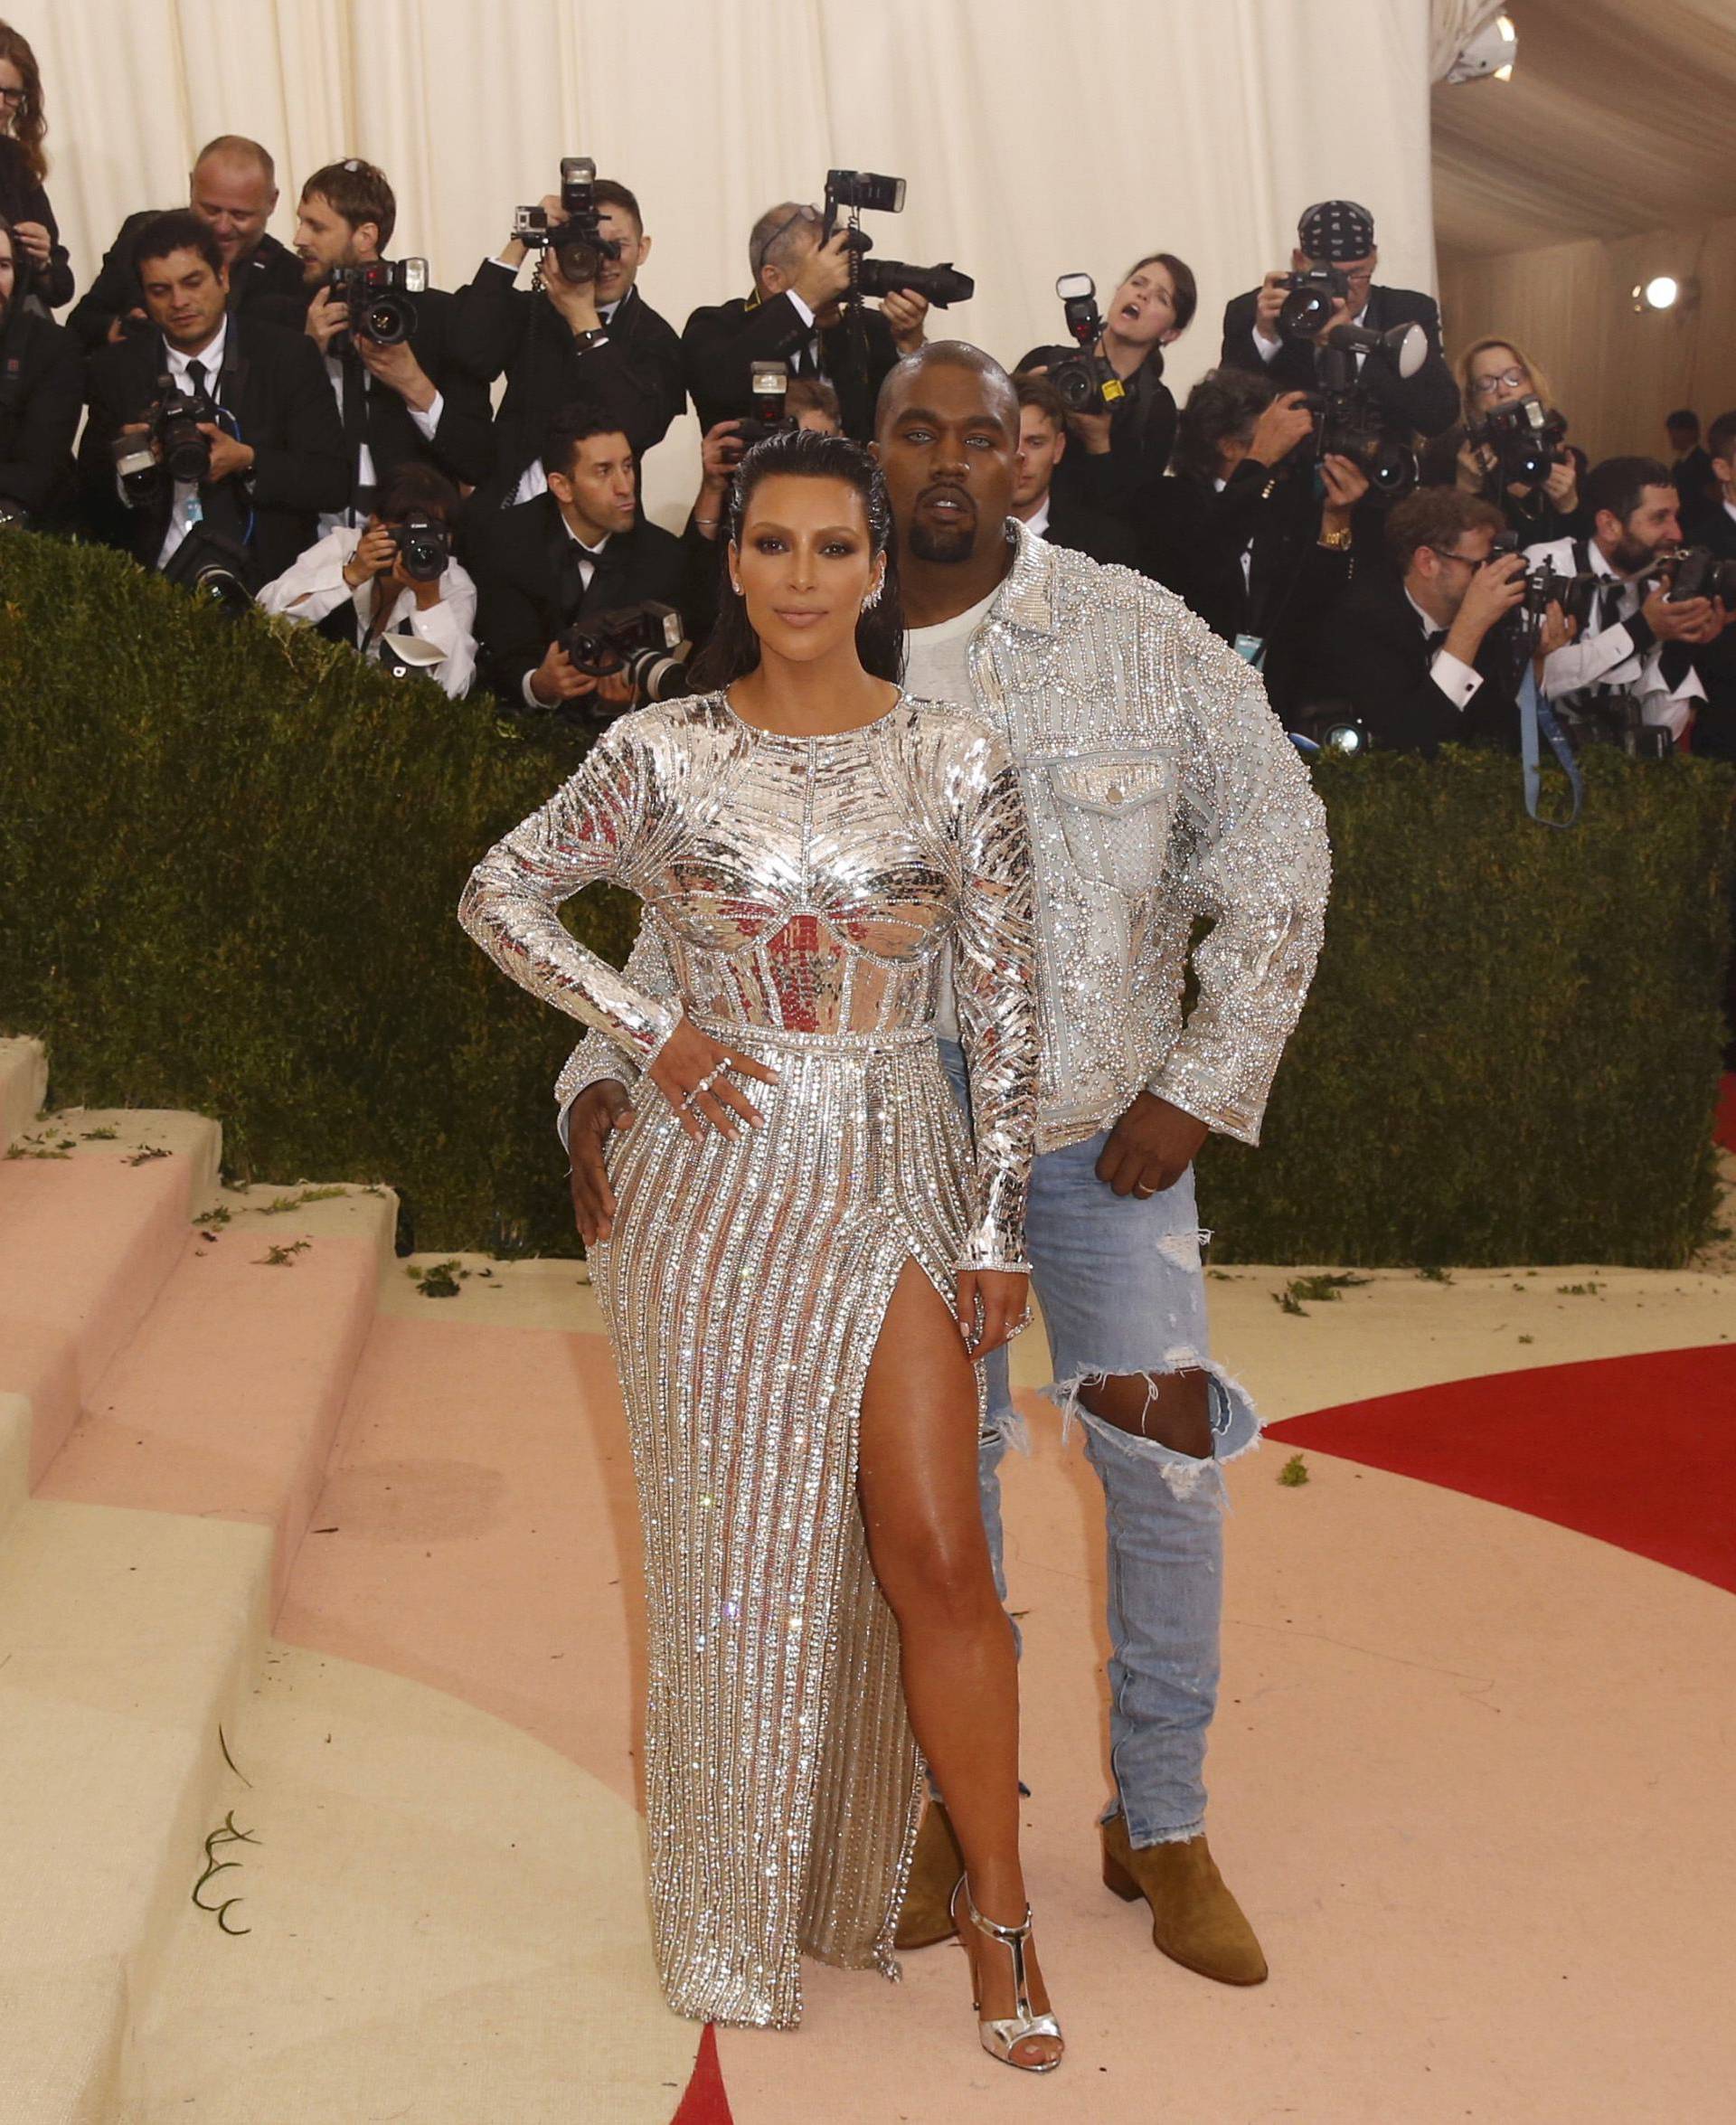 Musician Kanye West and wife Kim Kardashian arrive at the Met Gala in New York